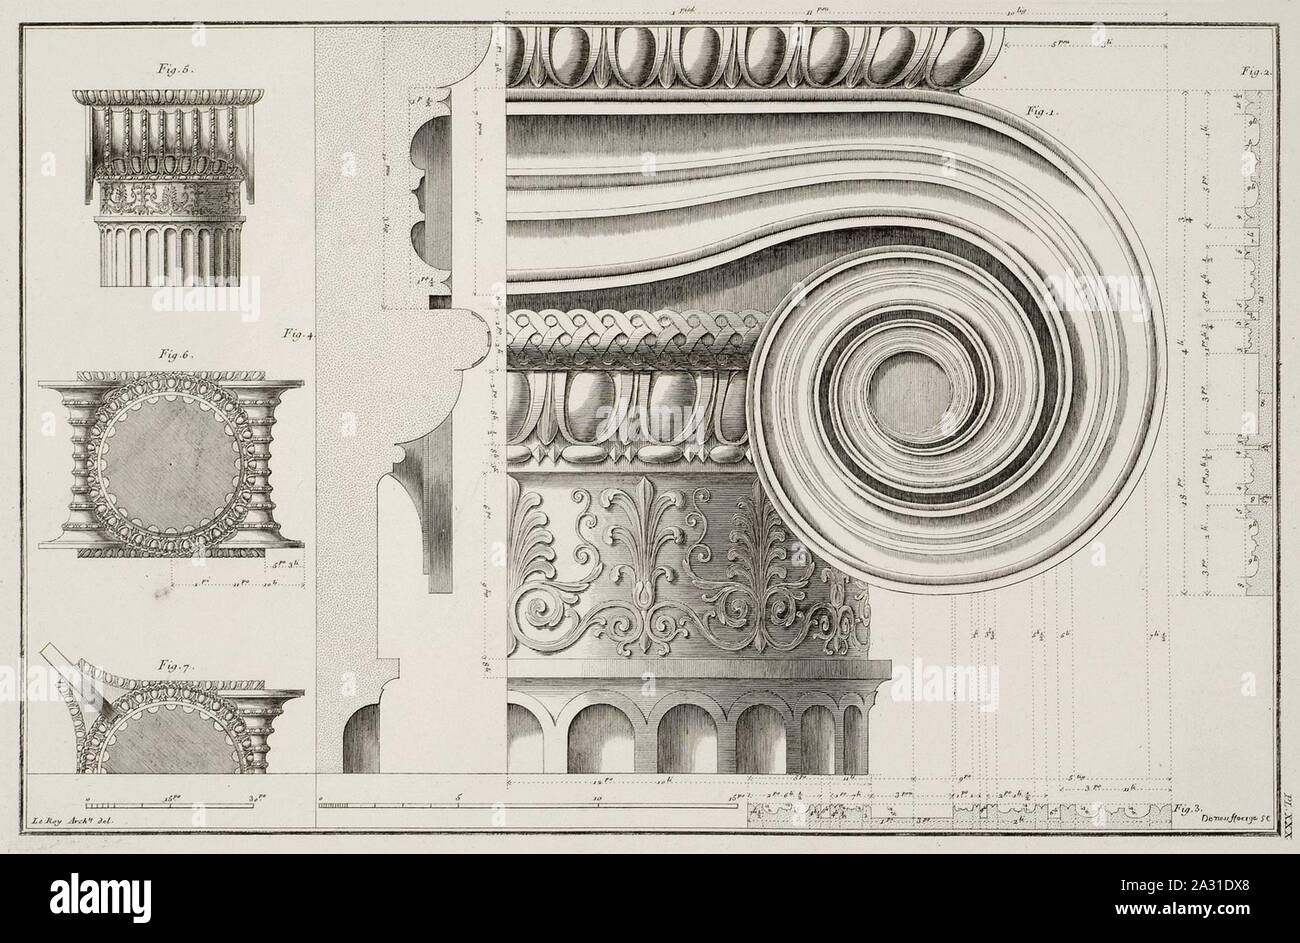 Erechtheion- 1 View of Ionic capital 2 and 3 Section plans of the helix of Ionic capital 4 Section plan of the capital 5 - Le Roy Julien David - 1770. Stock Photo